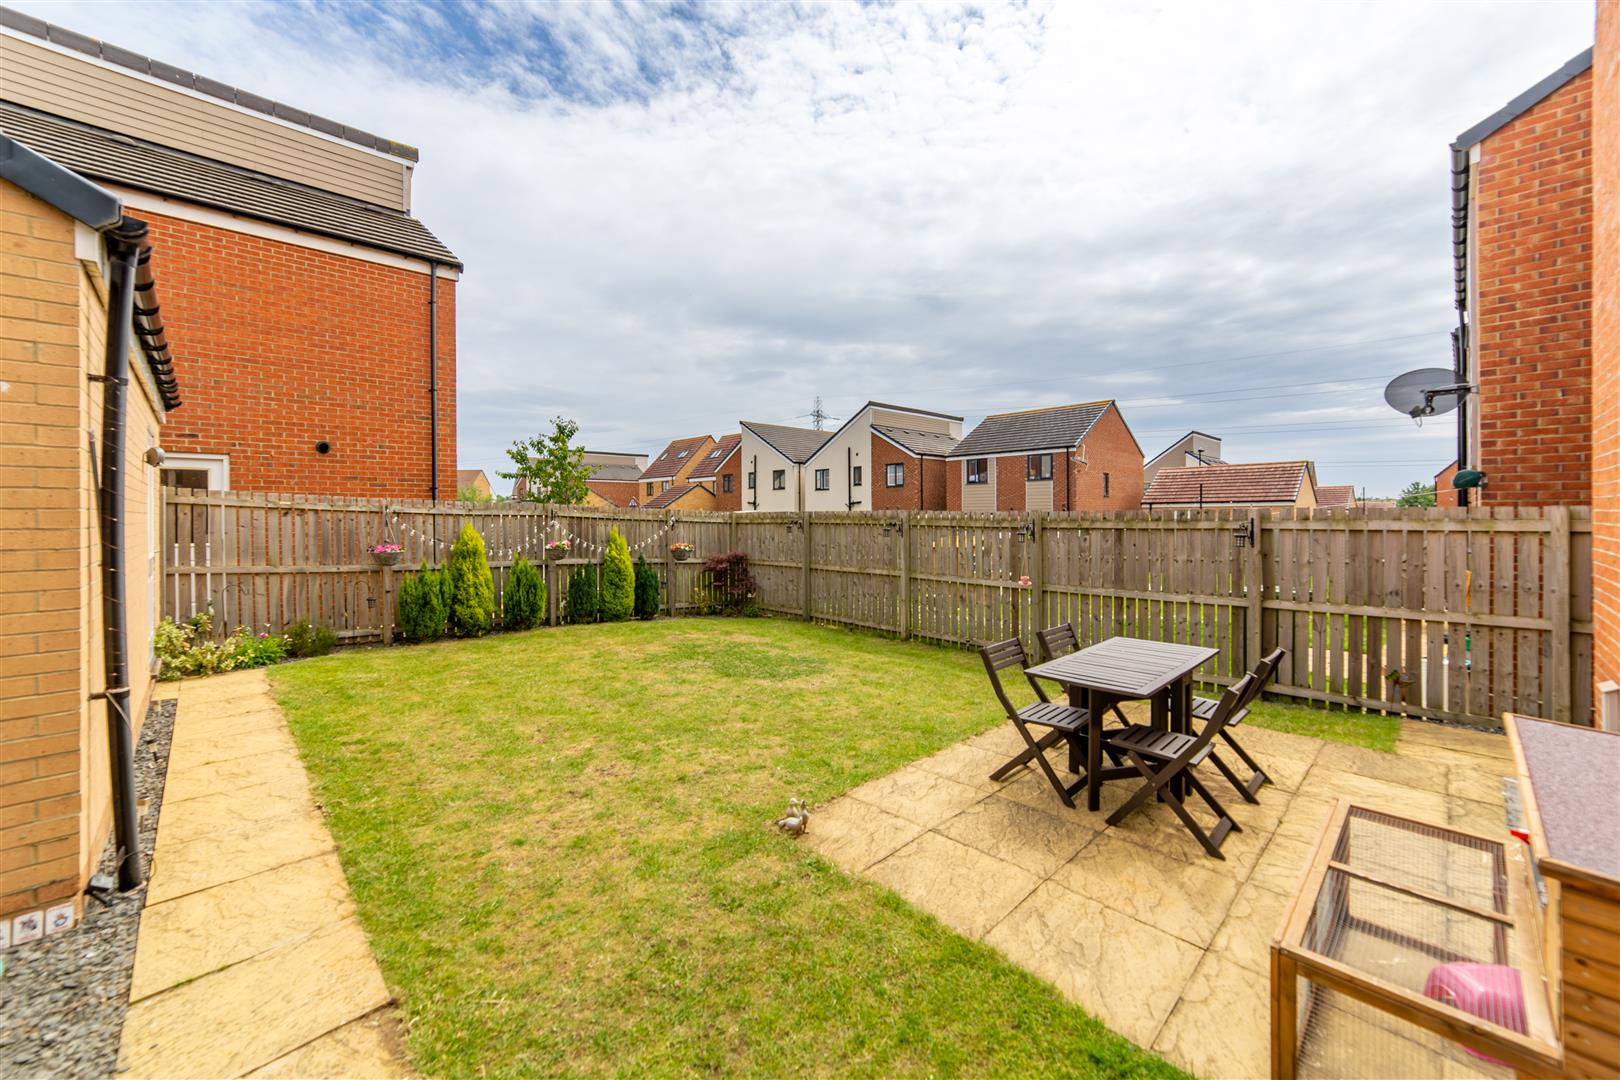 4 bed detached house for sale in Maynard Street, Great Park 2